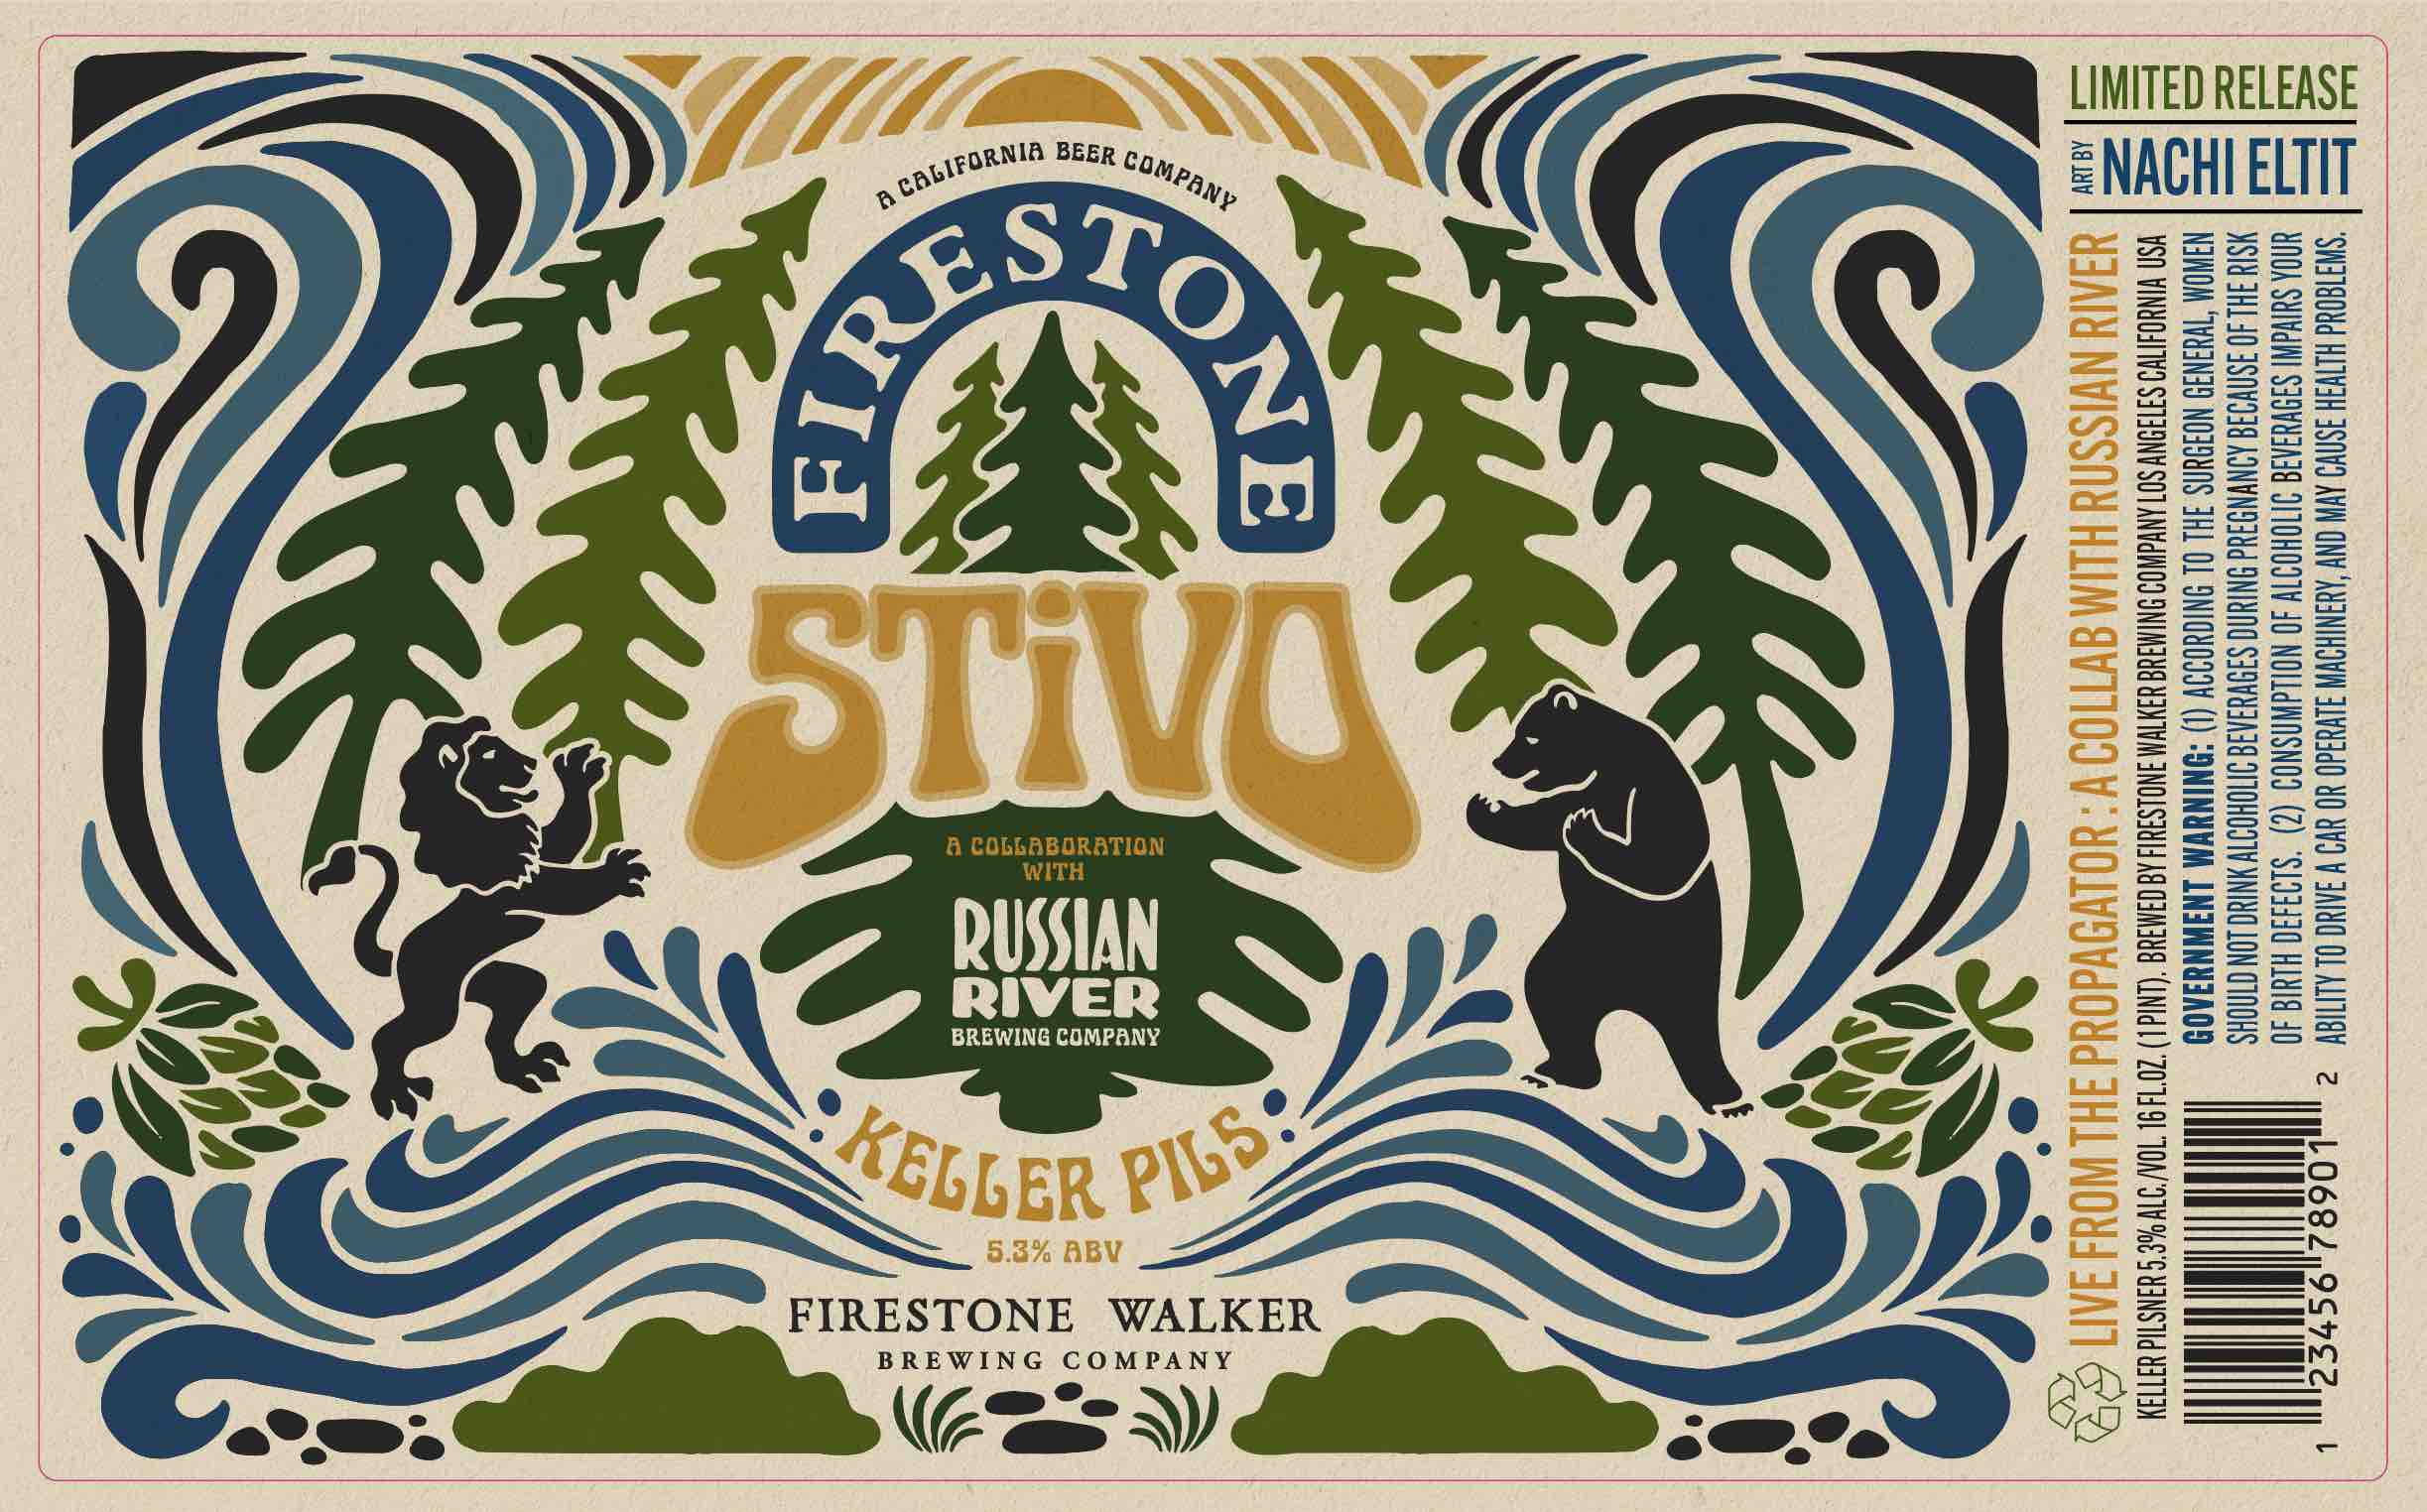 STiVO Pils Label - Firestone Walker Brewing and Russian River Brewing created by by Nachi Eltit